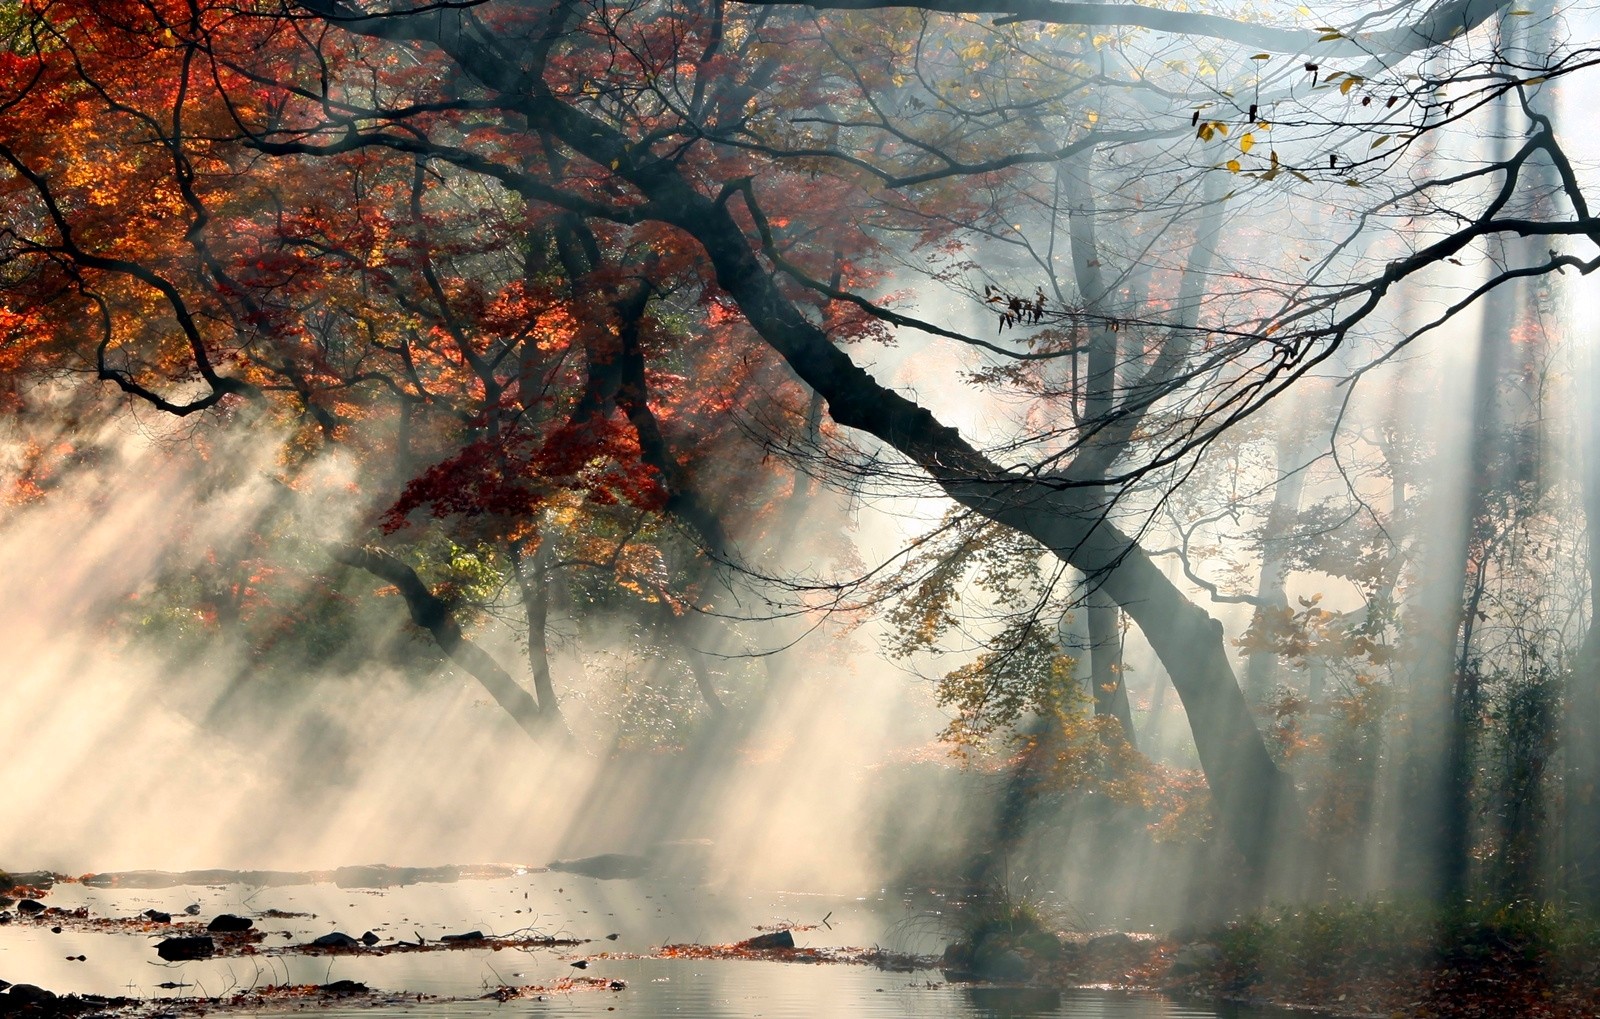 General 1600x1019 nature mist sun rays fall trees red leaves water shrubs